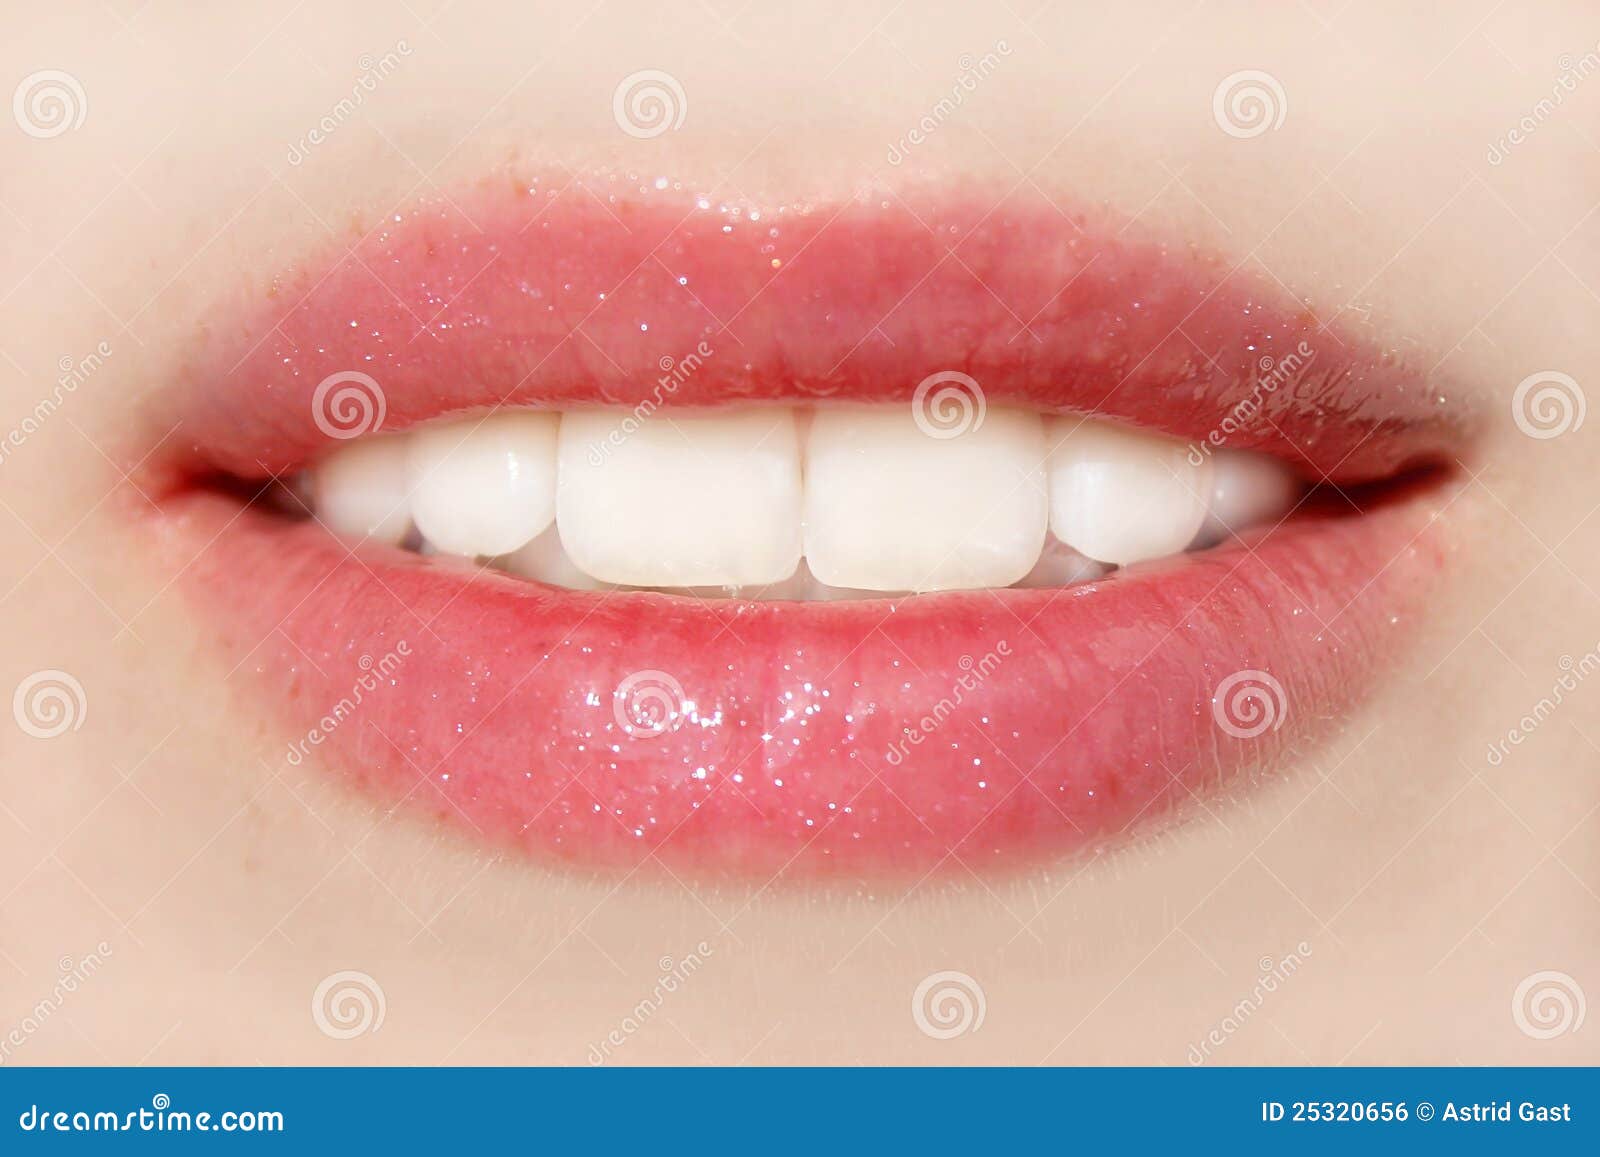 a nice women's mouth